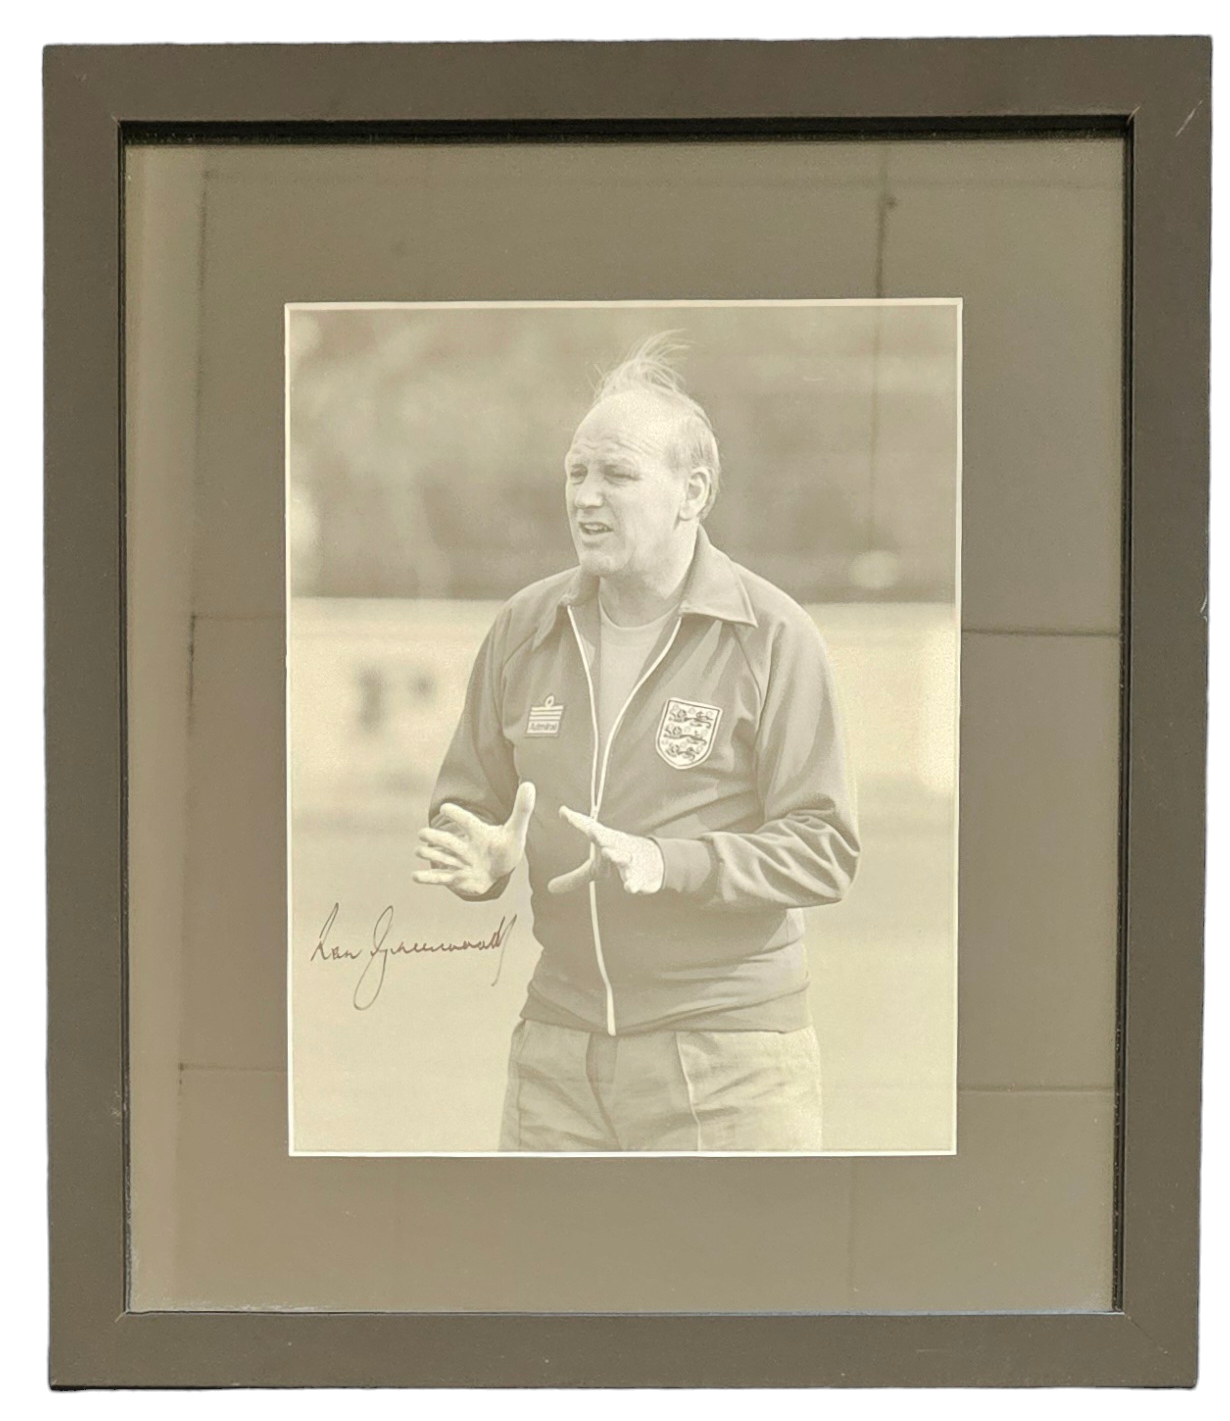 Ron Greenwood, CBE signed black and white photo 10x8 Inch. Was an English football player and